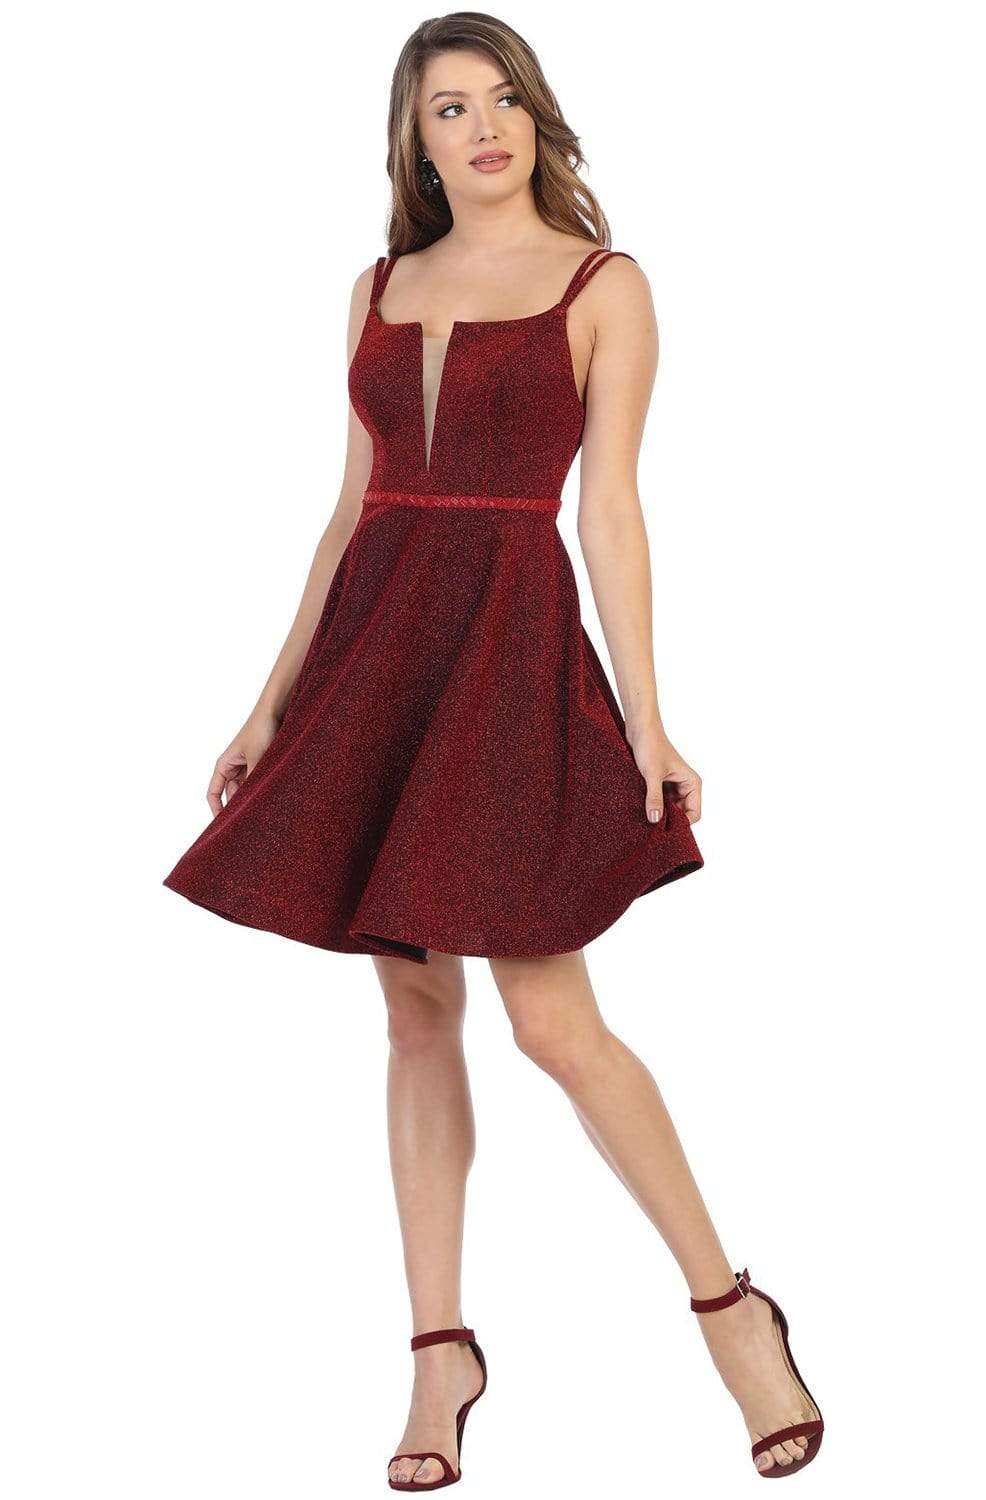 May Queen - MQ1697 Deep V-neck A-line Cocktail Dress
